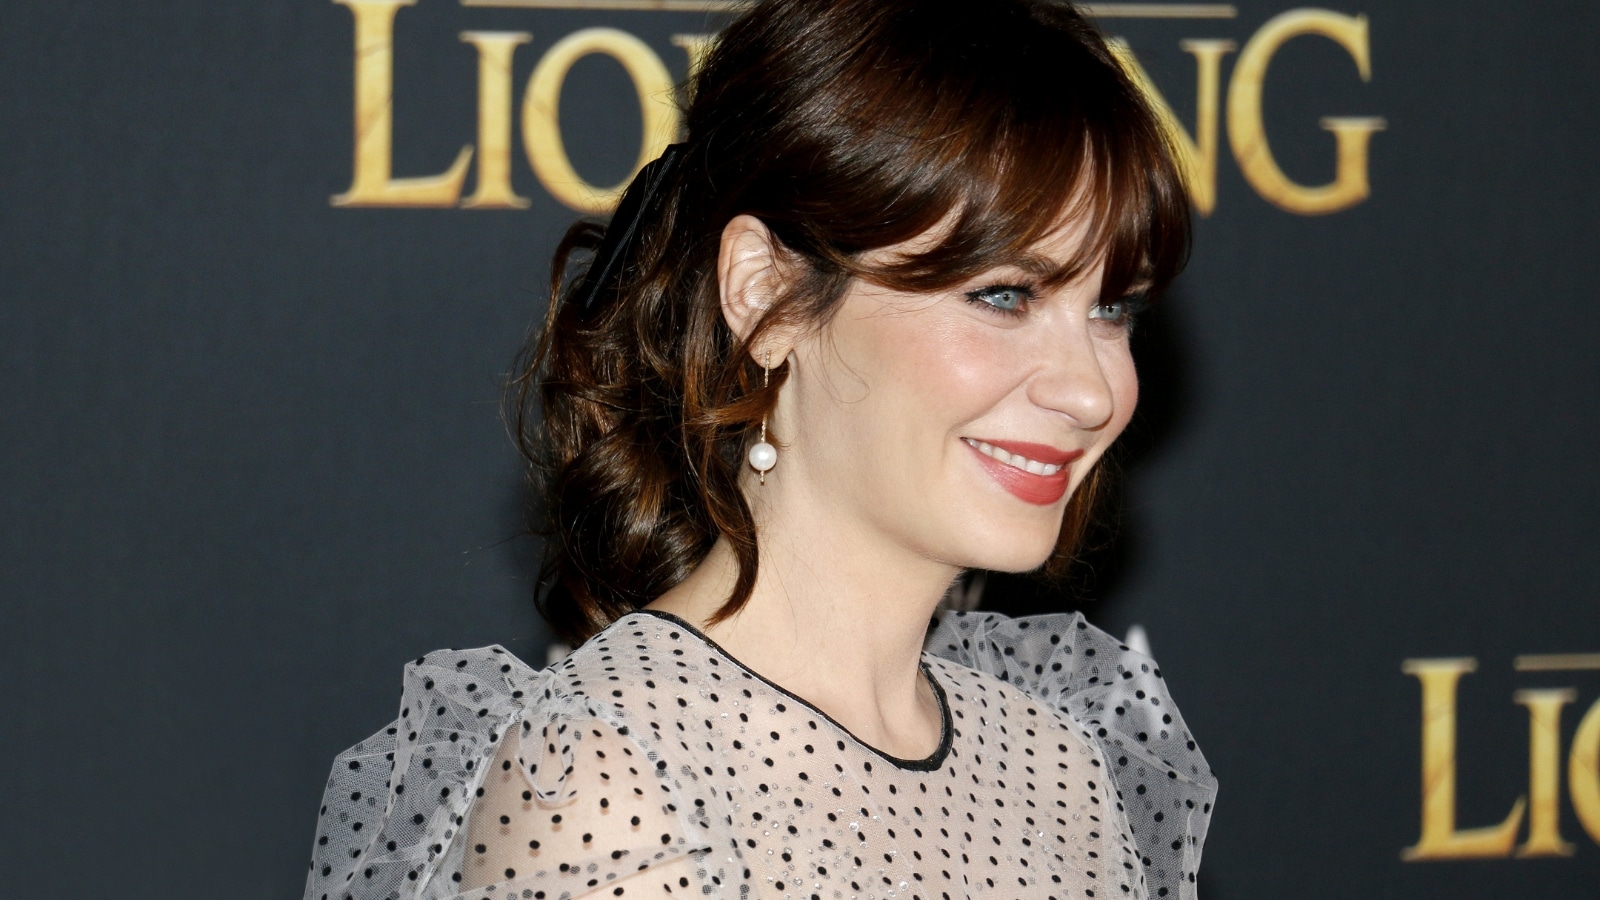 Zooey Deschanel at the World premiere of 'The Lion King' held at the Dolby Theatre in Hollywood, USA on July 9, 2019.